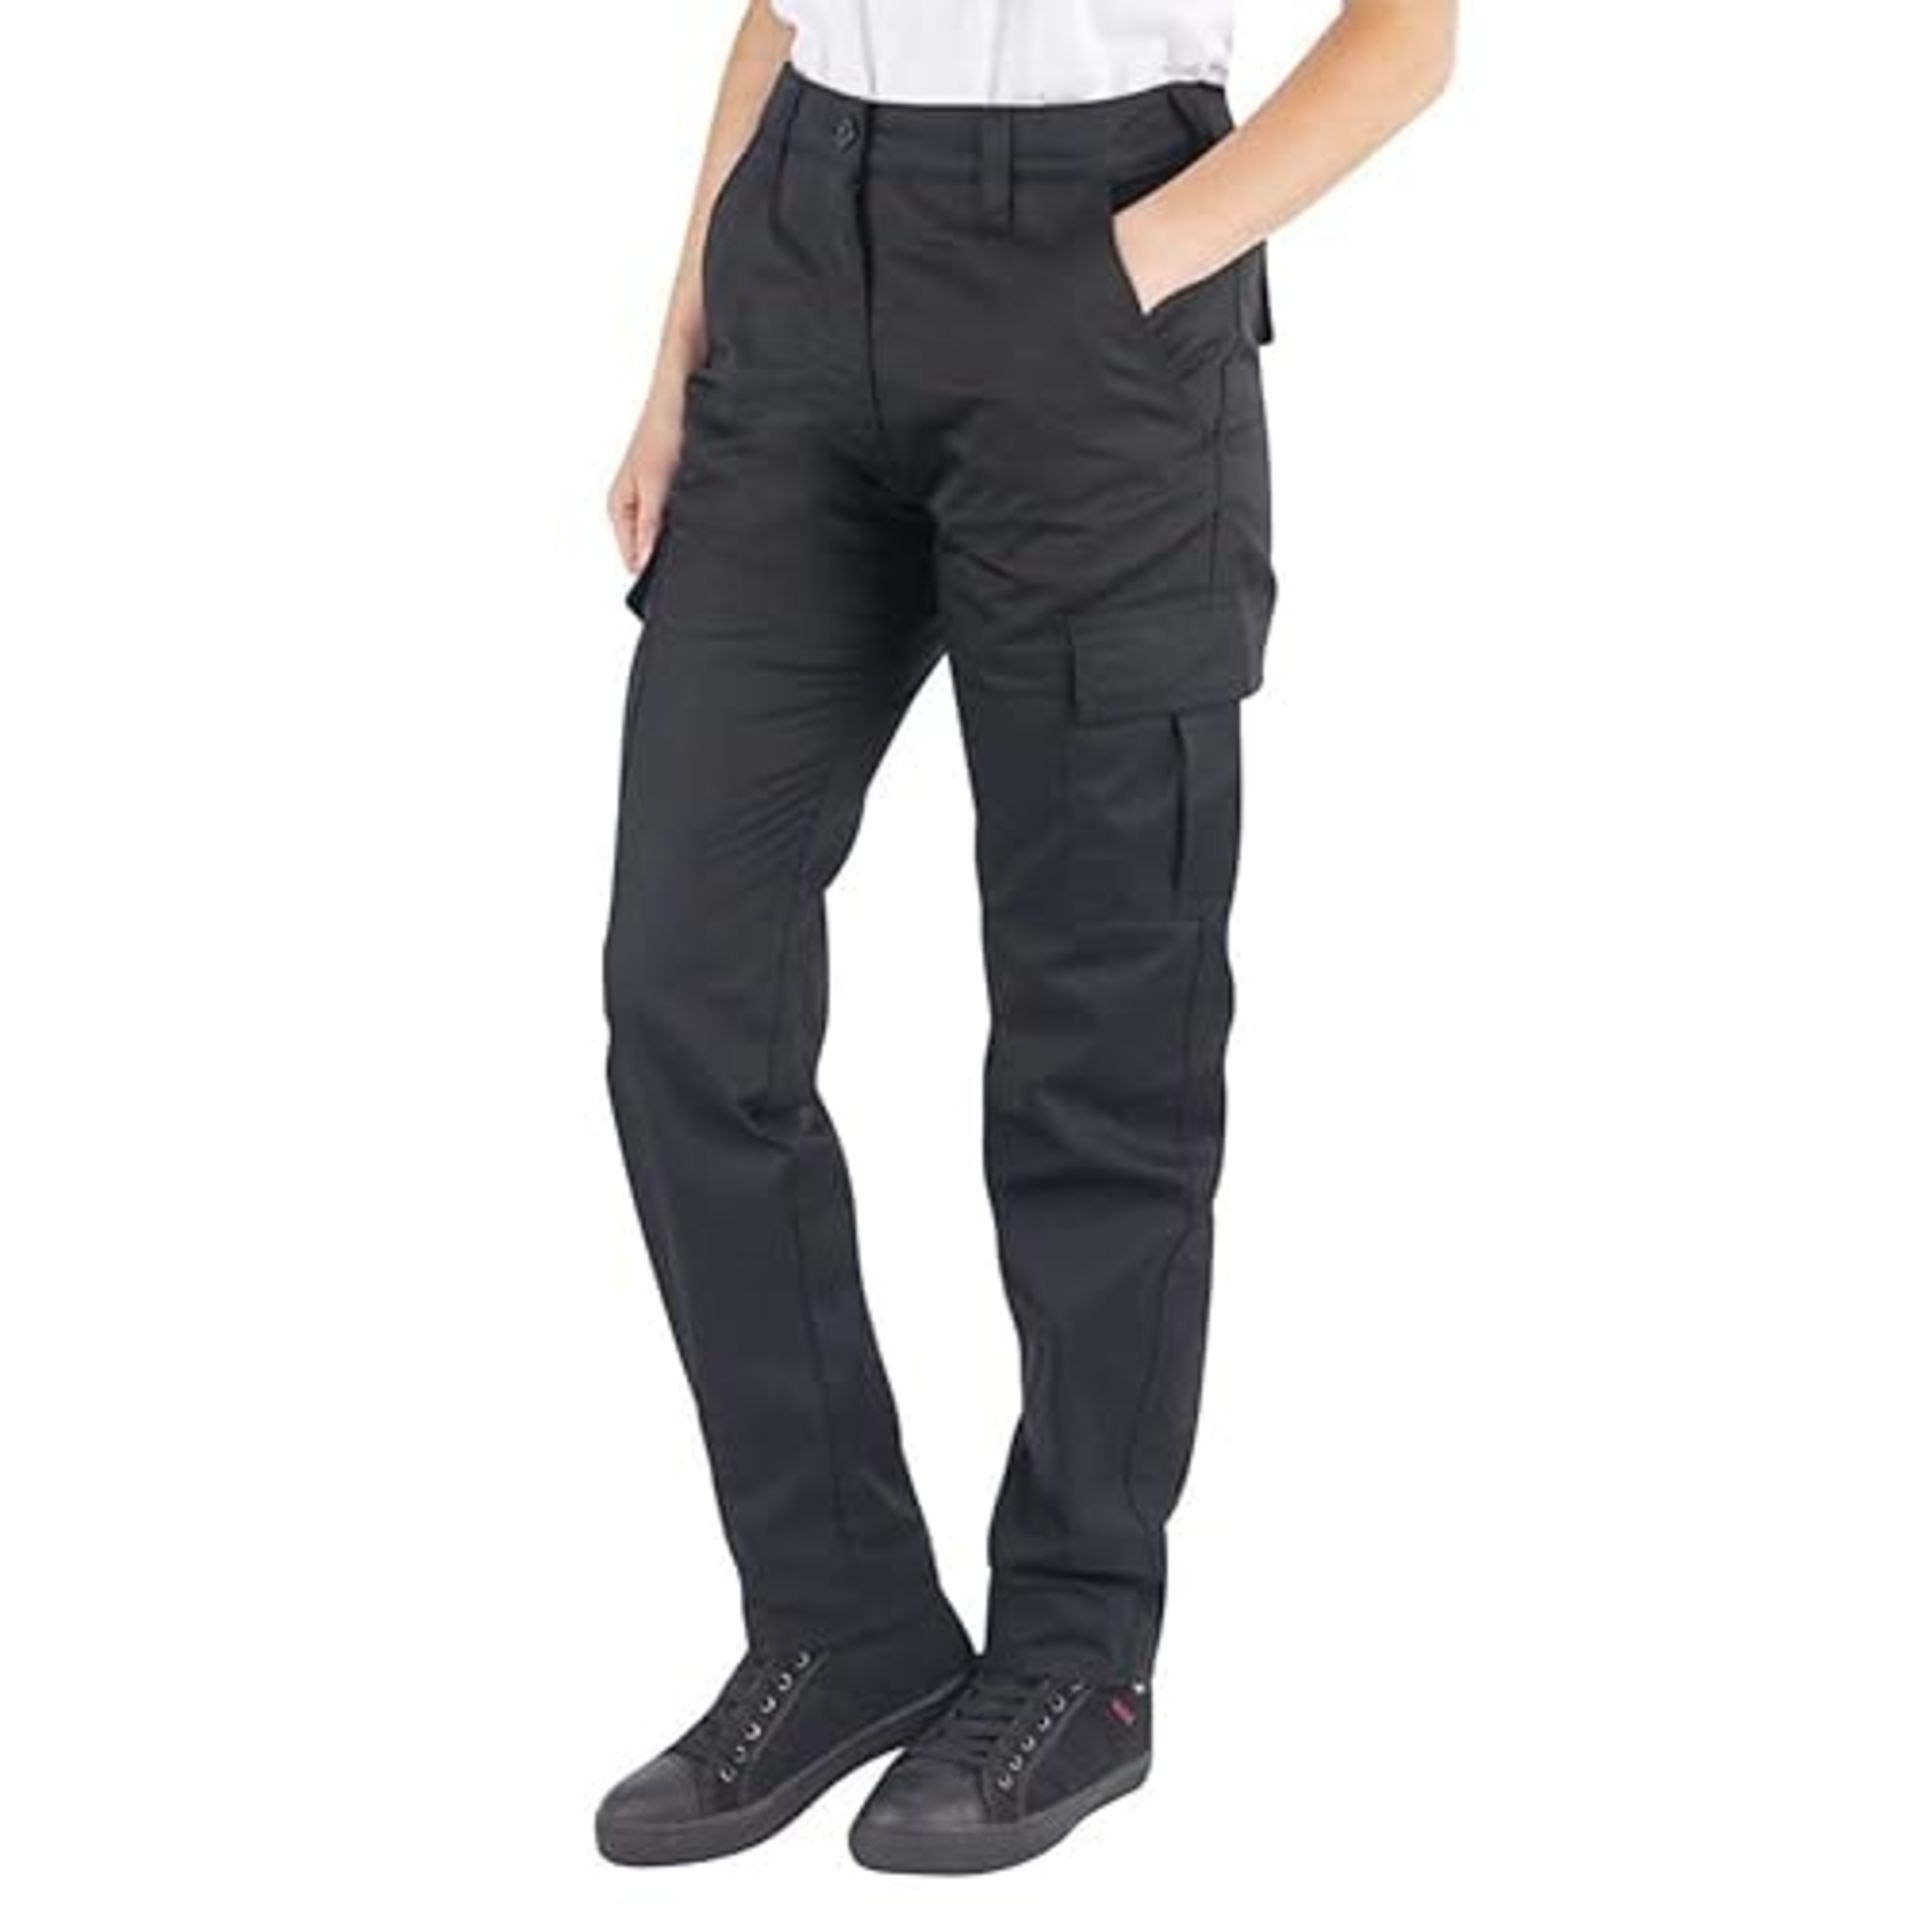 Lee Cooper Ladies Heavy Duty Easy Care Multi Pocket Work Safety Classic Cargo Pants Trousers, Black